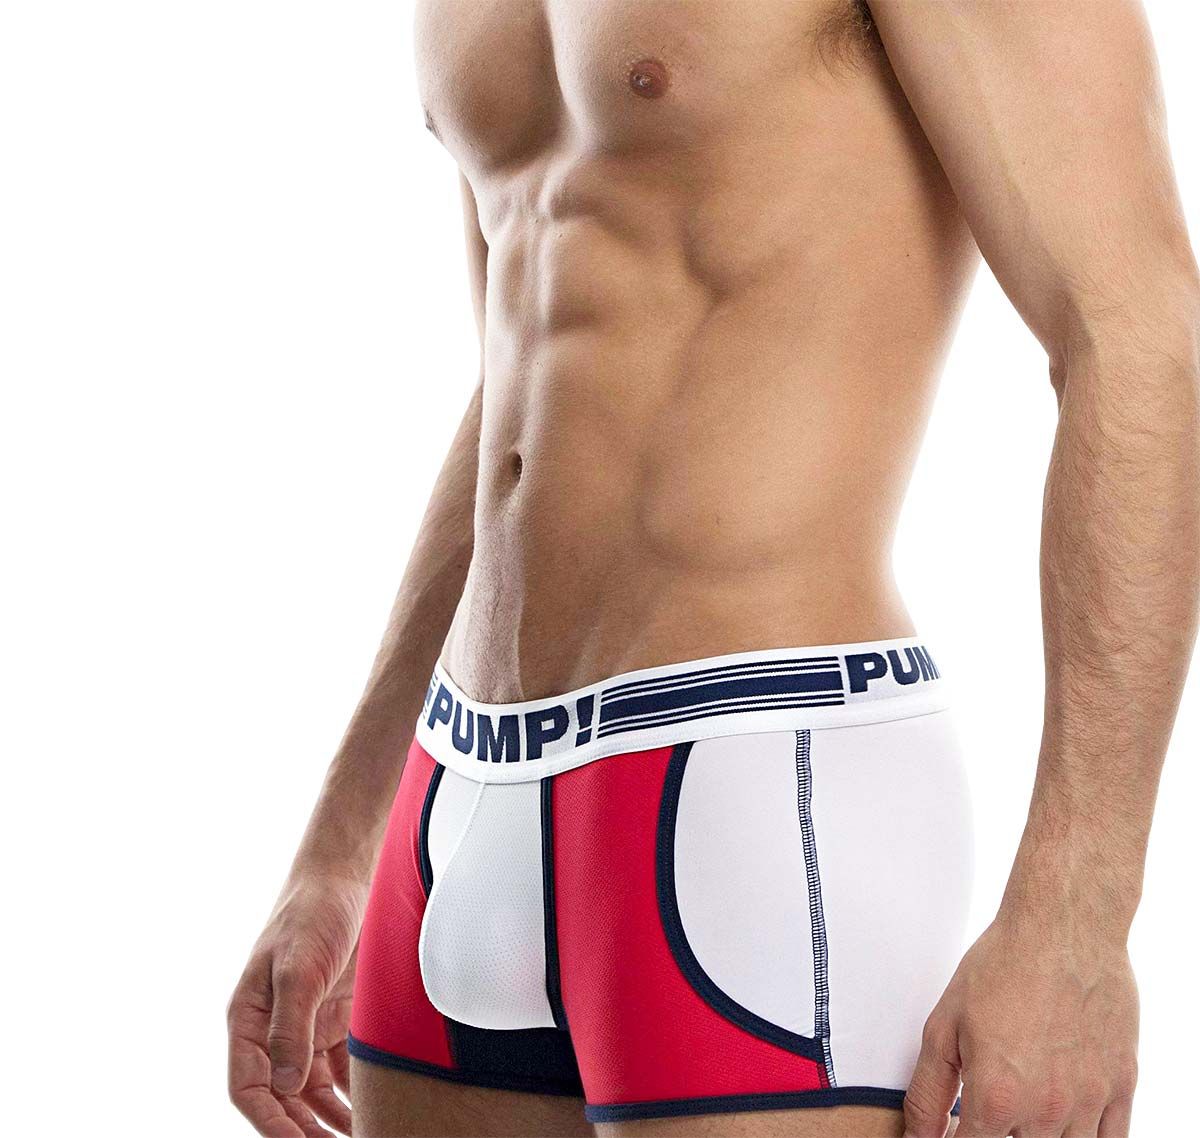 PUMP! Boxers ACADEMY JOGGER 11073, red